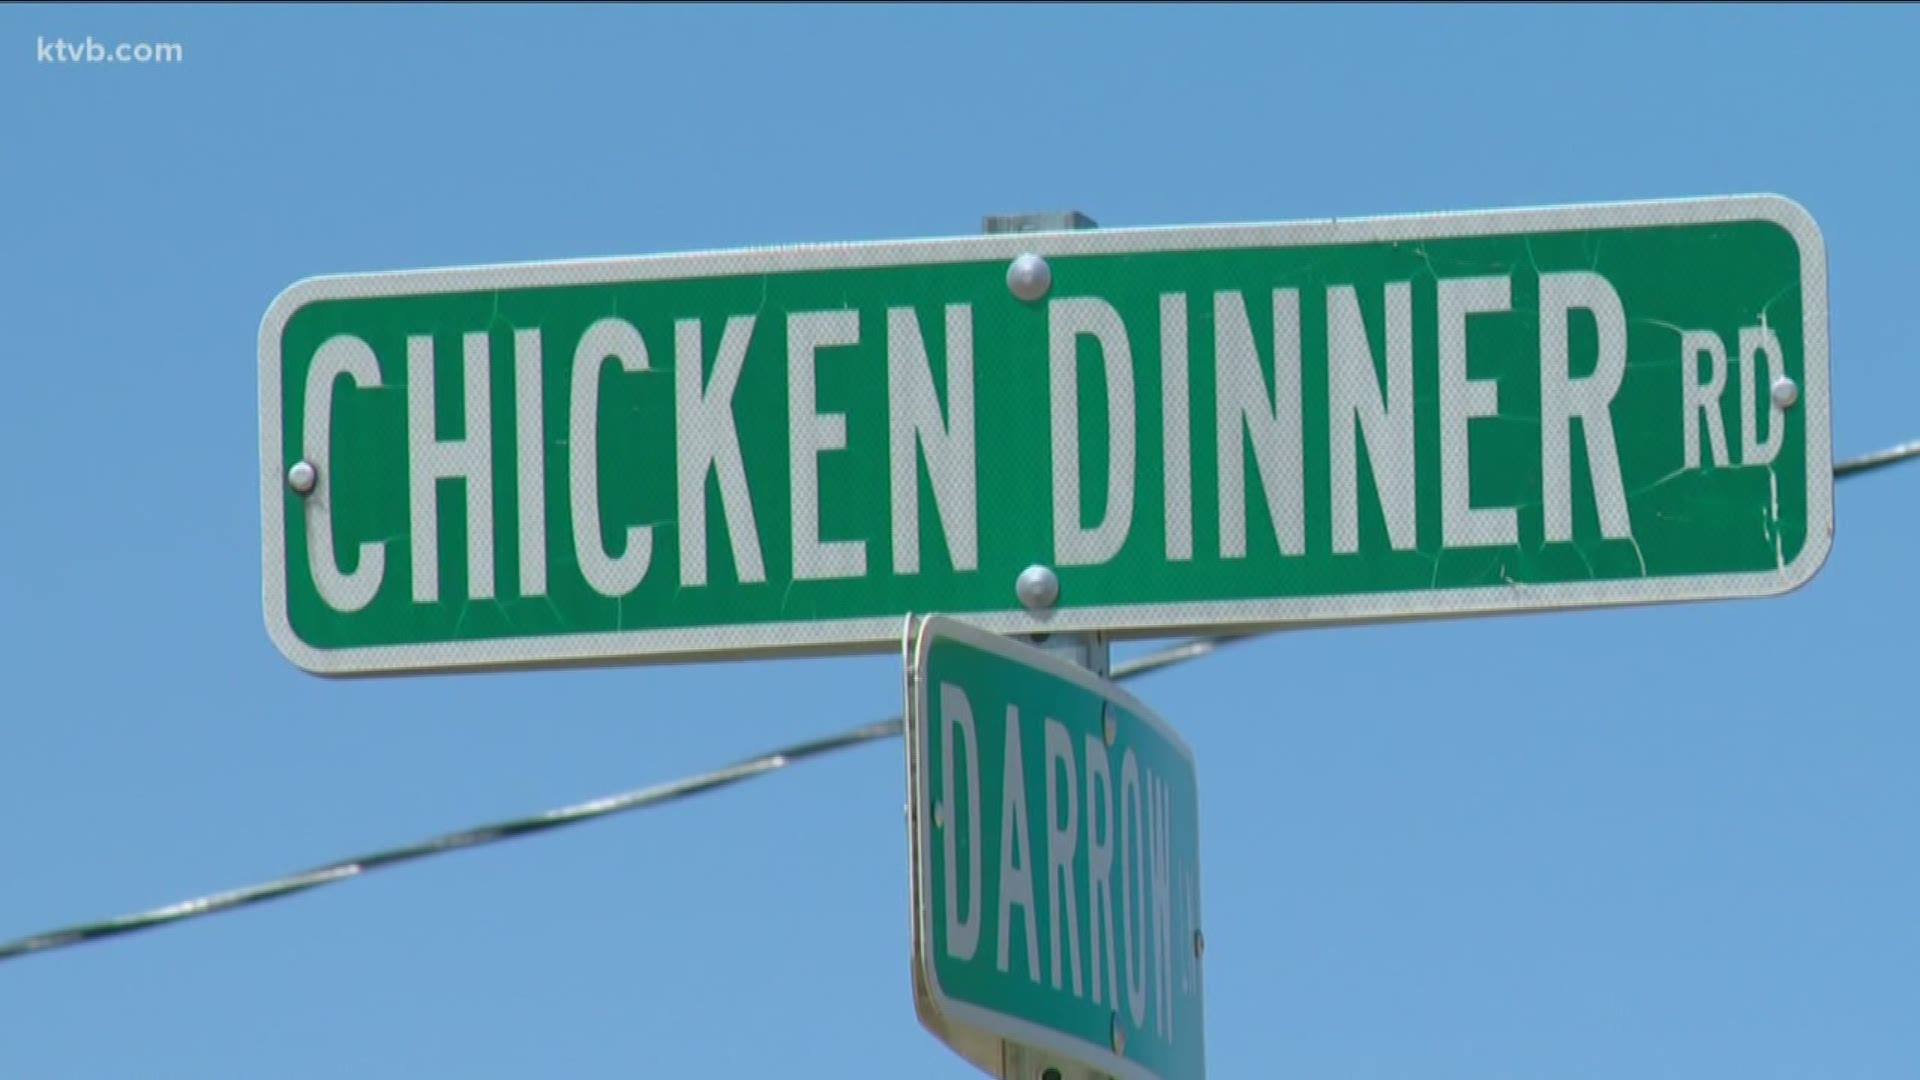 The Idaho House of Representatives voted to pass a resolution to preserve the history of Chicken Dinner Road.